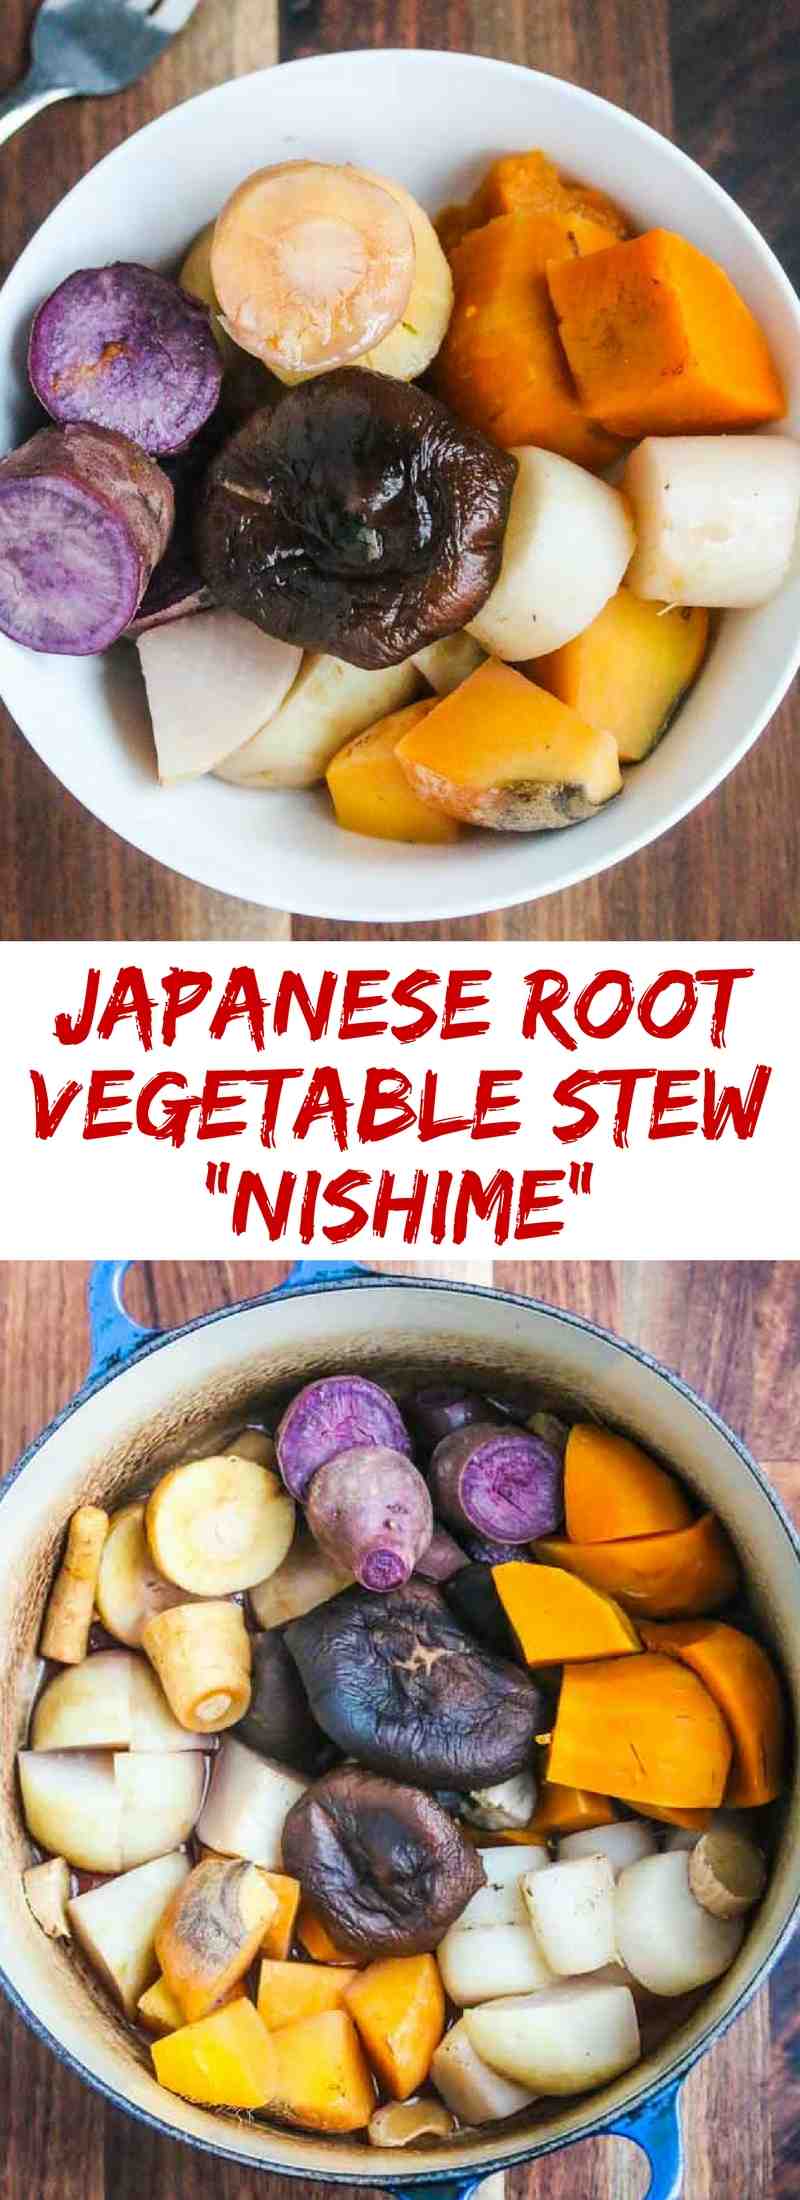 Japanese Root Vegetable Stew (Nishime) - a nourishing, healthy dish featuring slow braised nutritious root vegetables